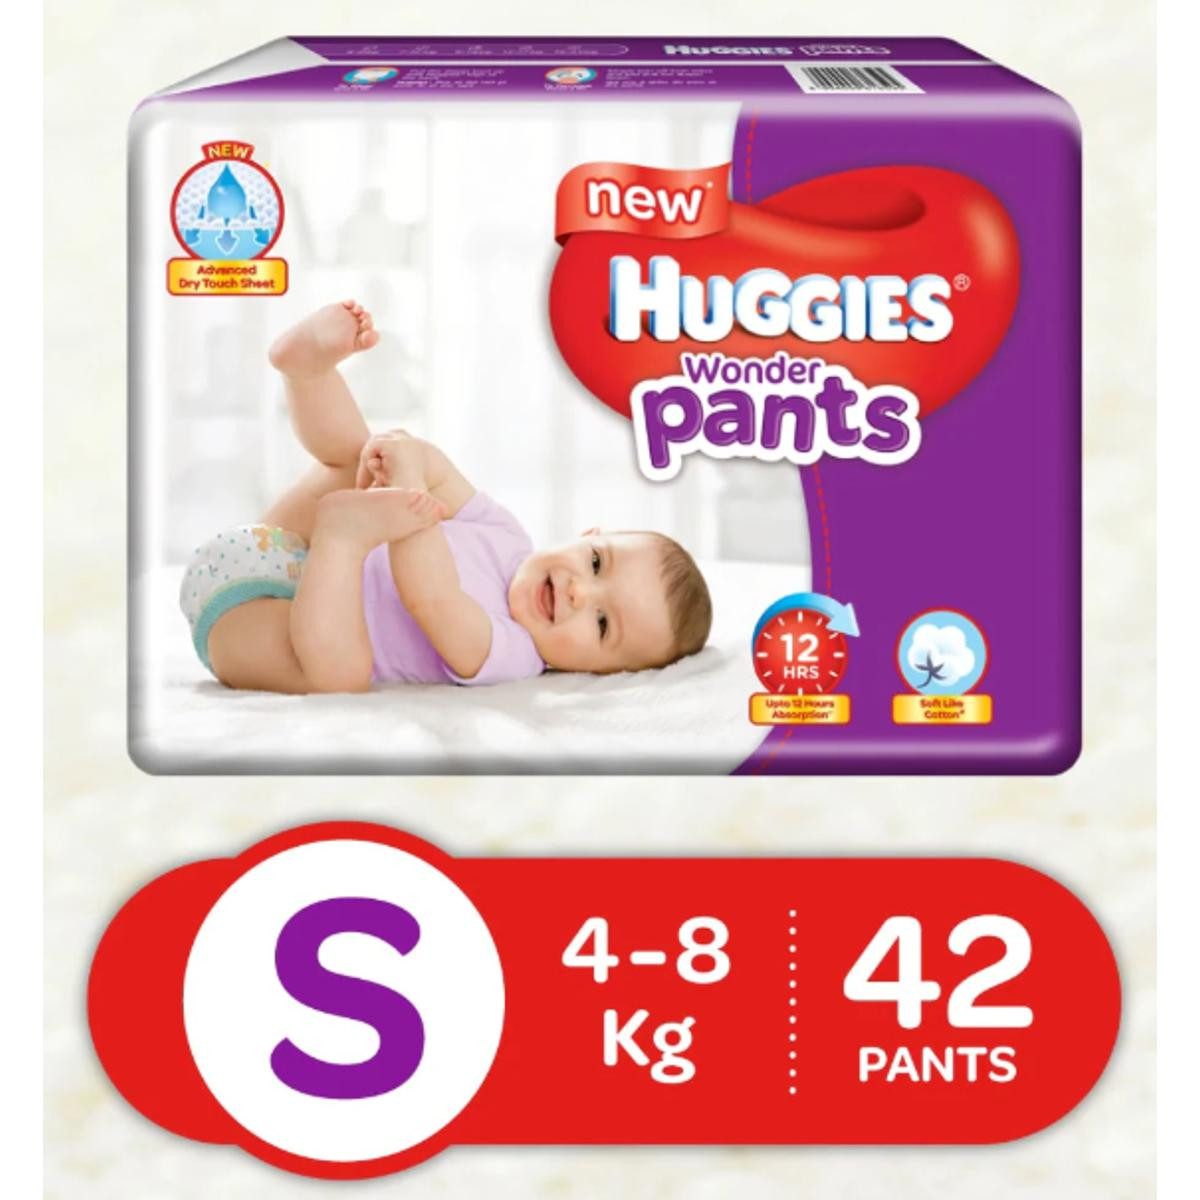 Huggies Wonder Pant (Pant System) Small Size(S)- 42 pieces, 4-8 kg